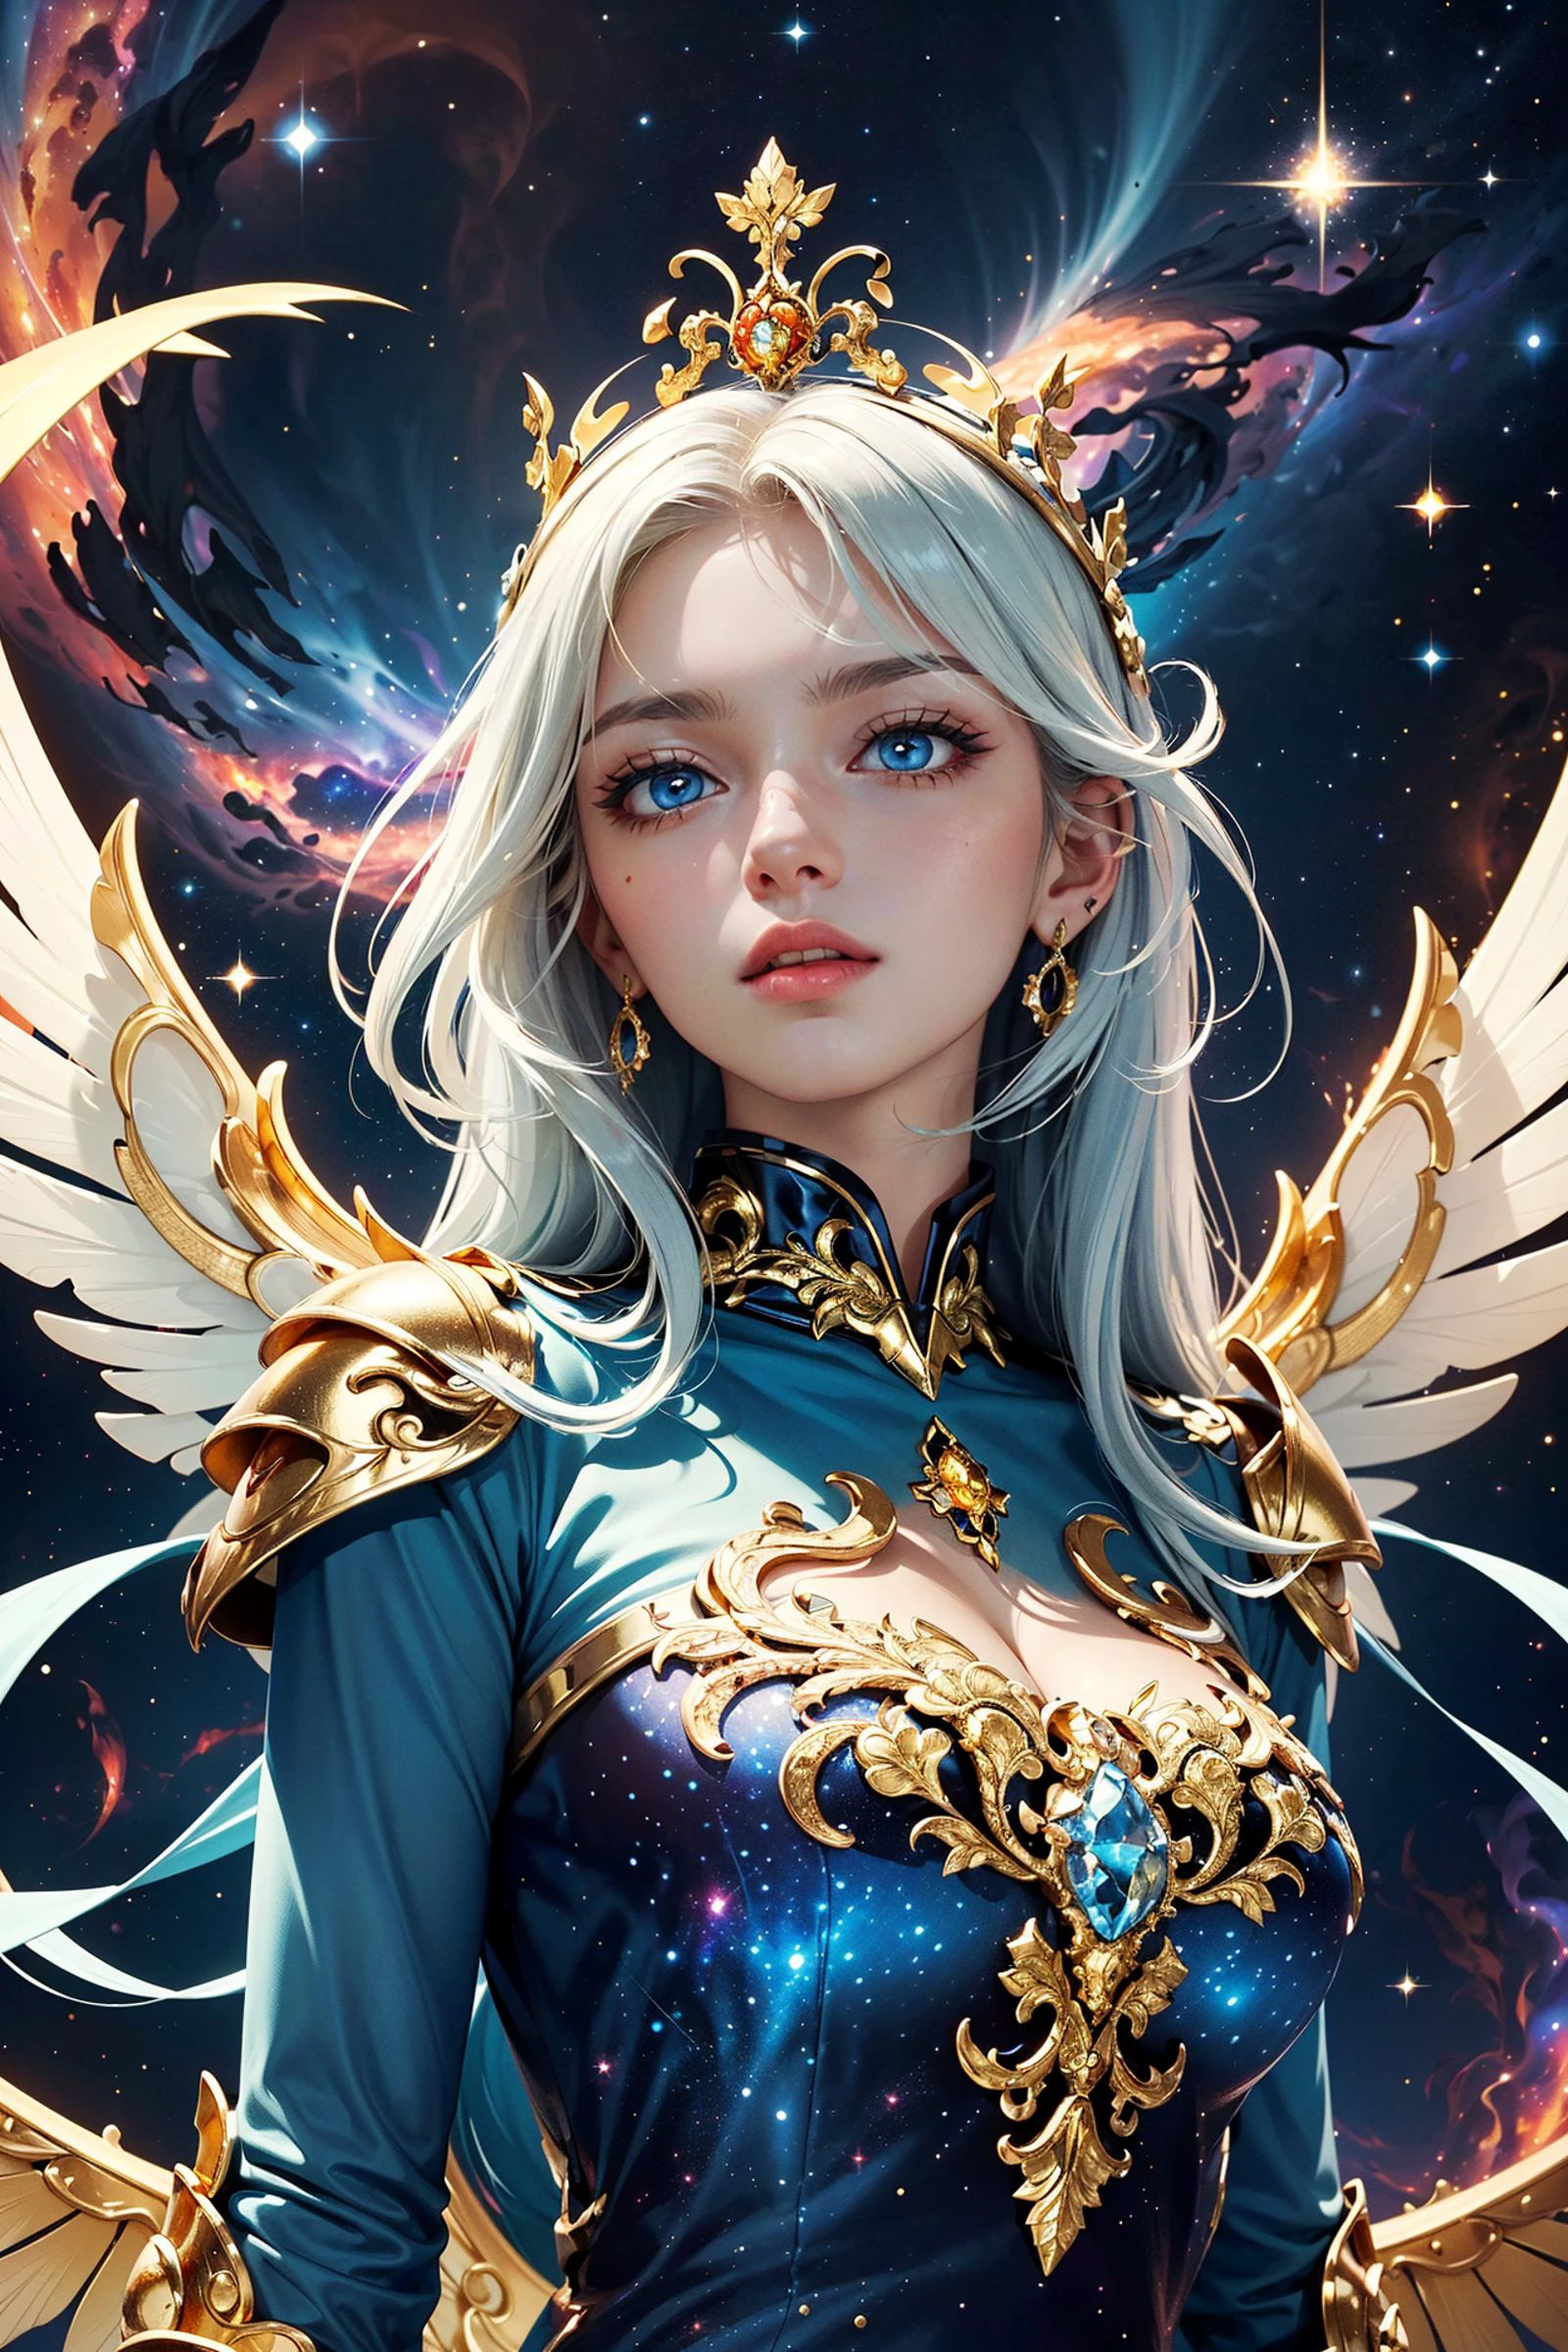 (masterpiece, best quality:1.4), (beautiful, aesthetic, perfect, delicate, intricate:1.2), 
shingoaraki-style-smf,
1girl, adult (elven:0.7) woman, blue eyes, long blue hairstyle,
Style-GravityMagic, mid body, looking up, solo, detailed background, detailed face, ((HolyFantasy:0.8), light fantasy theme:1.1), white hair, holy healer sorcerer,  very complex golden armor, gold armored wings, diamond crown, dynamic pose, pearl color scheme, blue flames, in background,  symmetrical composition, cinematic atmosphere, very complex golden background full of power, cosmos and stars on background, energetic nebula and galaxies imploding